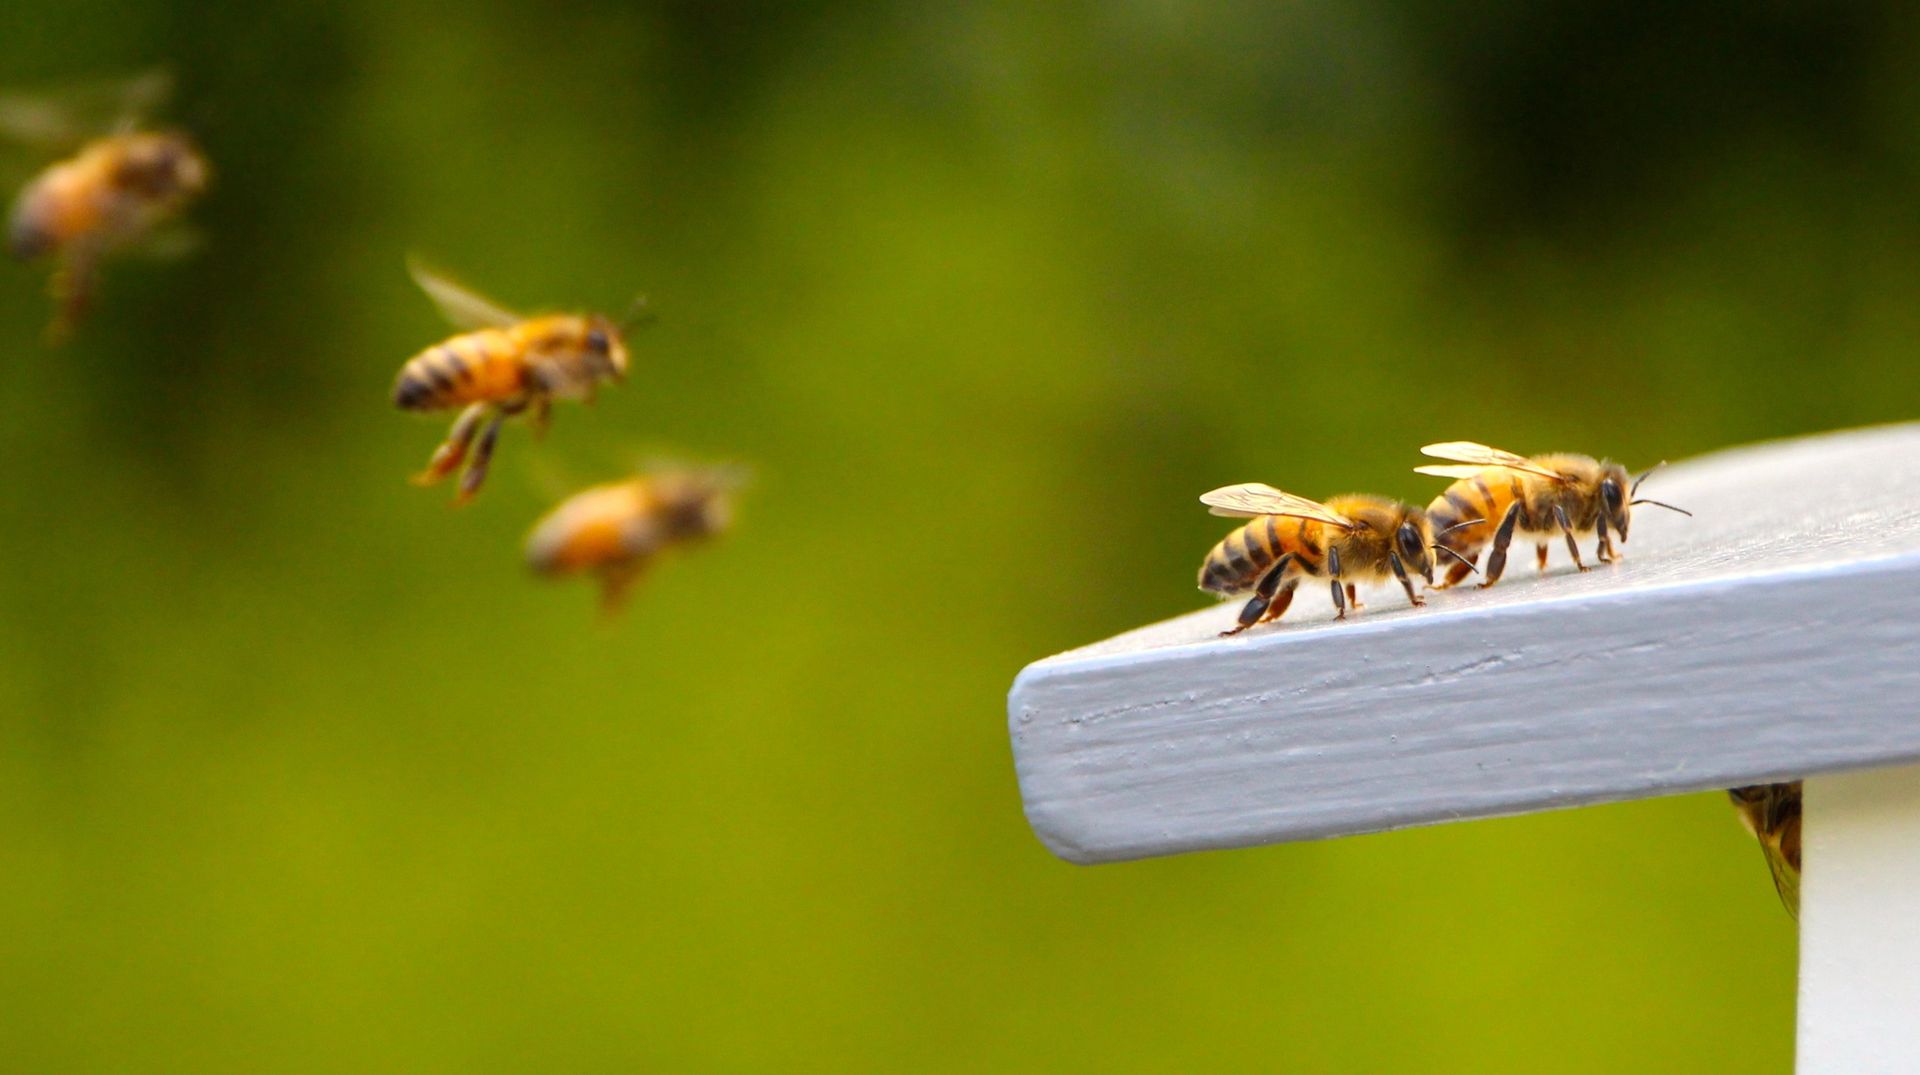 Bee Removal in Chino Hills, CA | Bee Wranglers Inc.